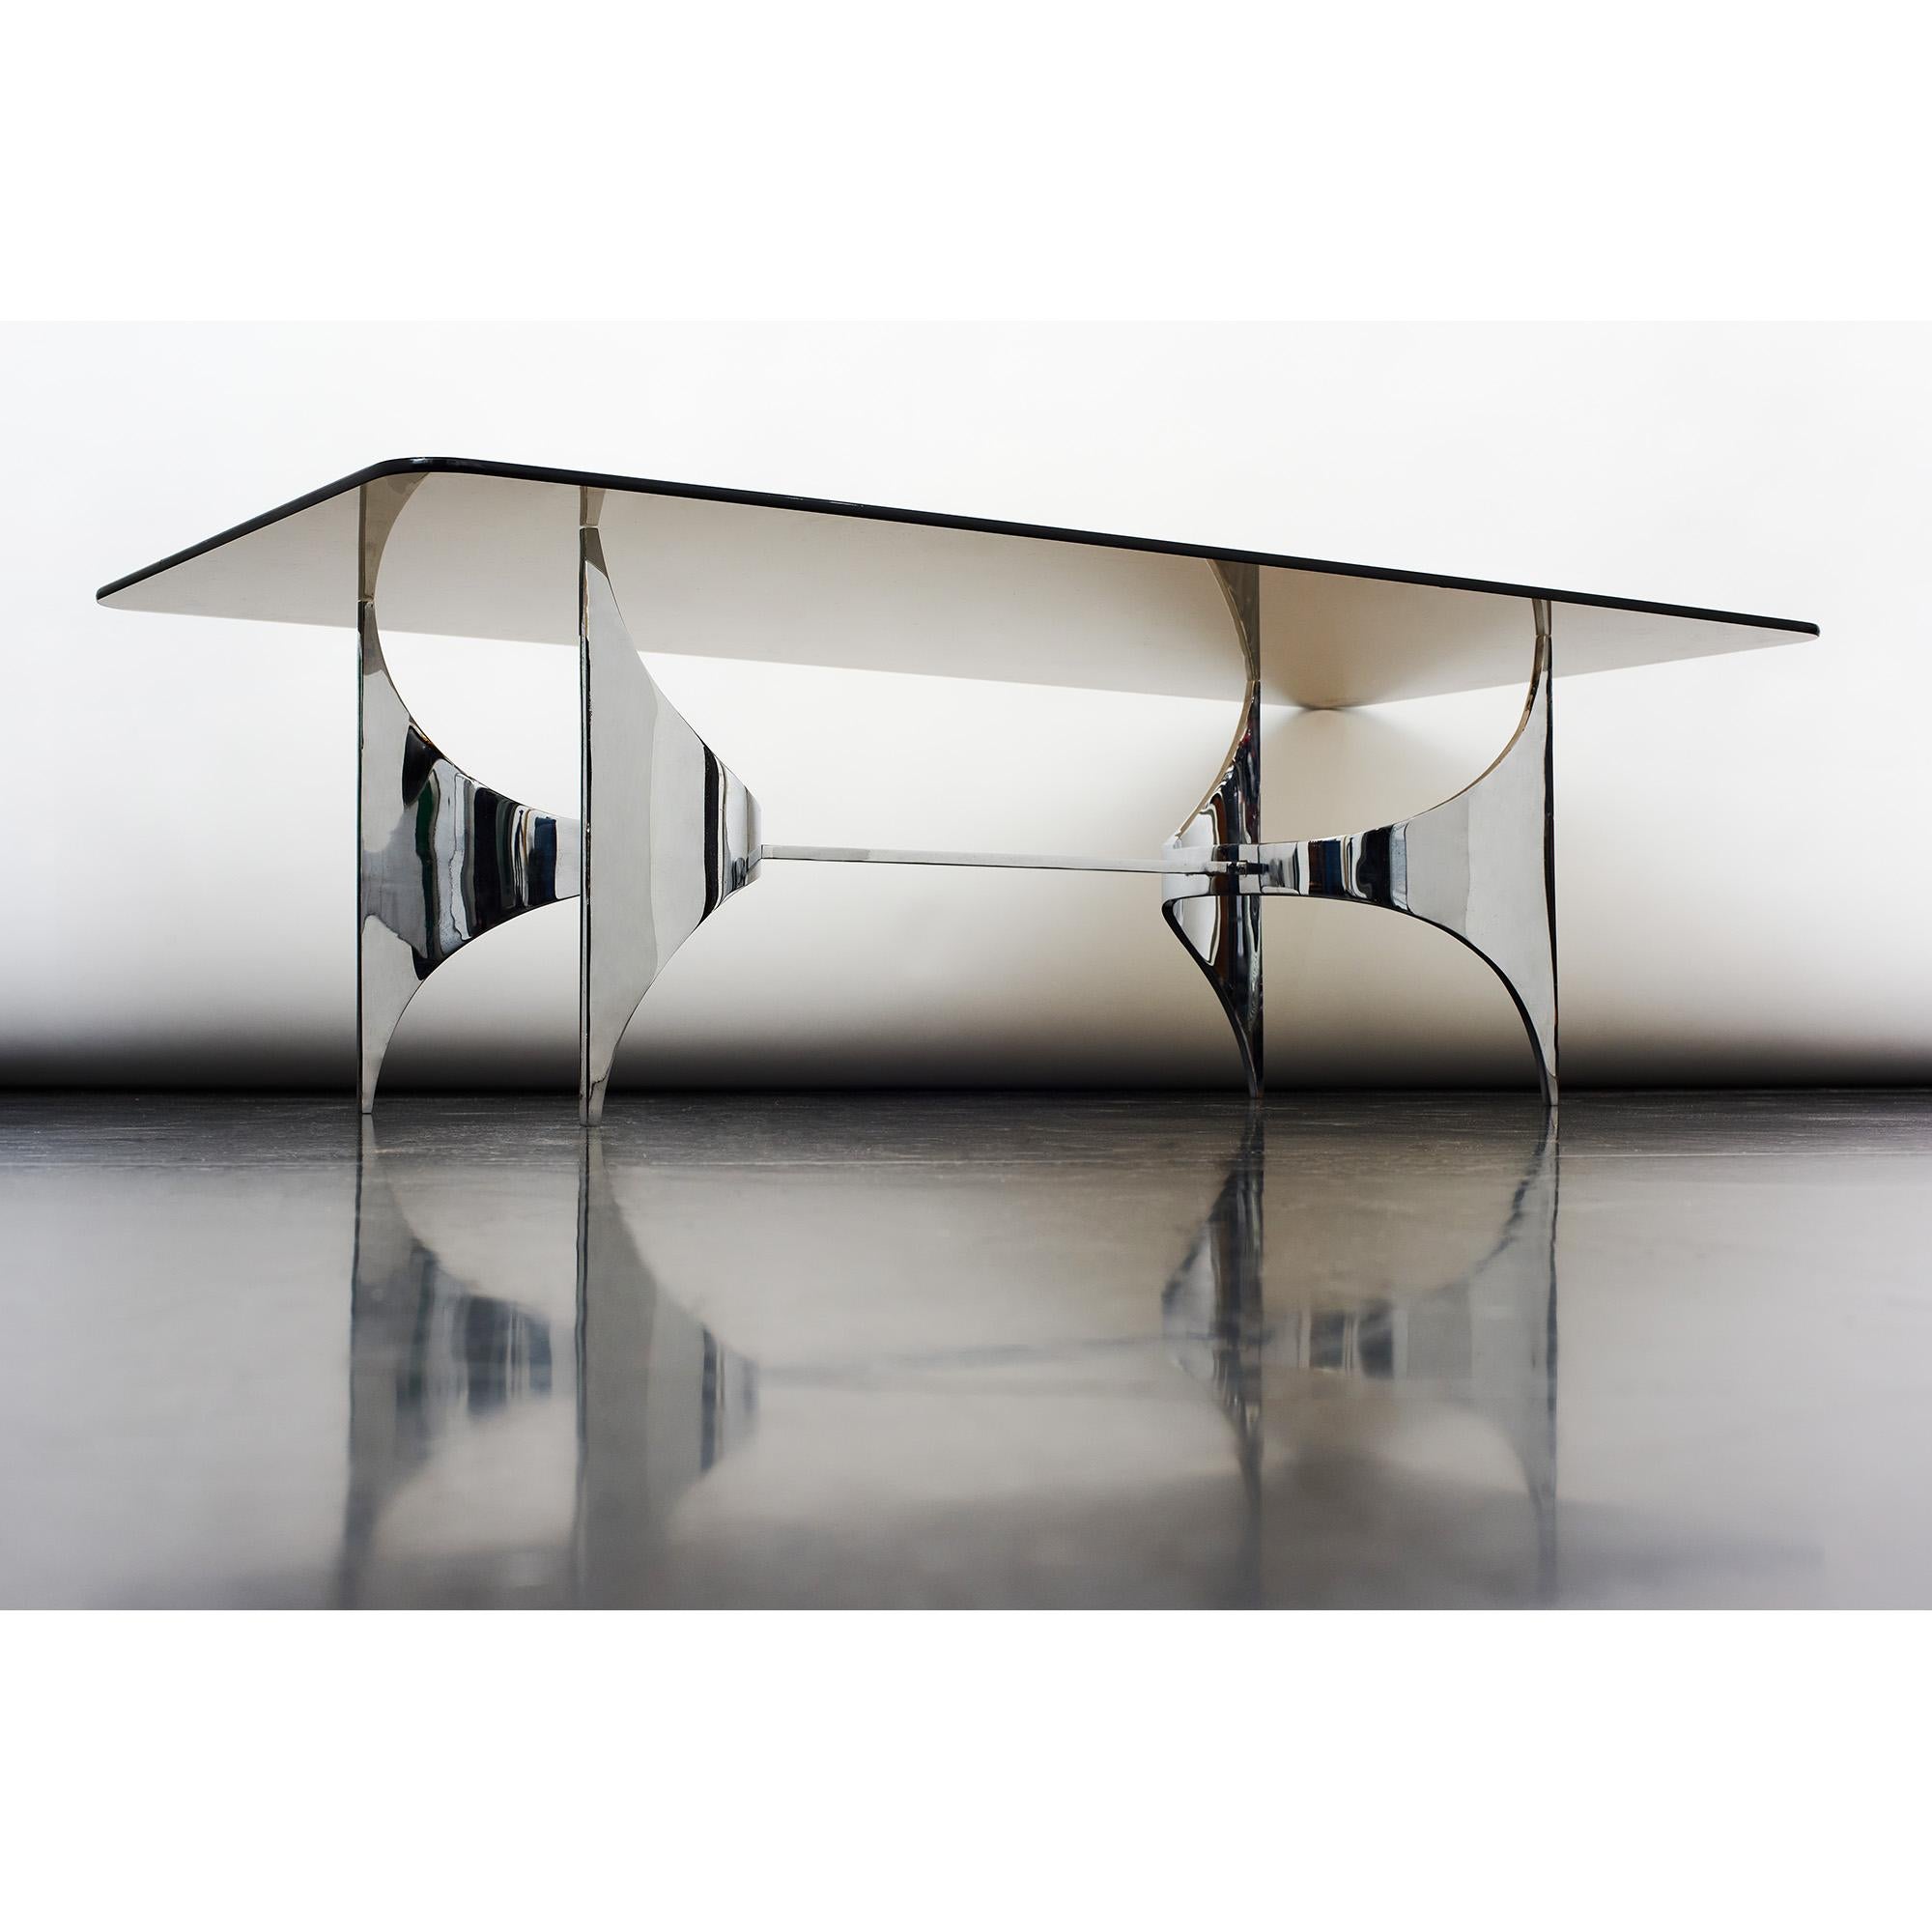 Sculptural coffee table in the style of Knut Hesterberg for Ronald Schmitt, Germany 1970s.
Aerodynamic stainless steel legs with smoked caramel glass on top.